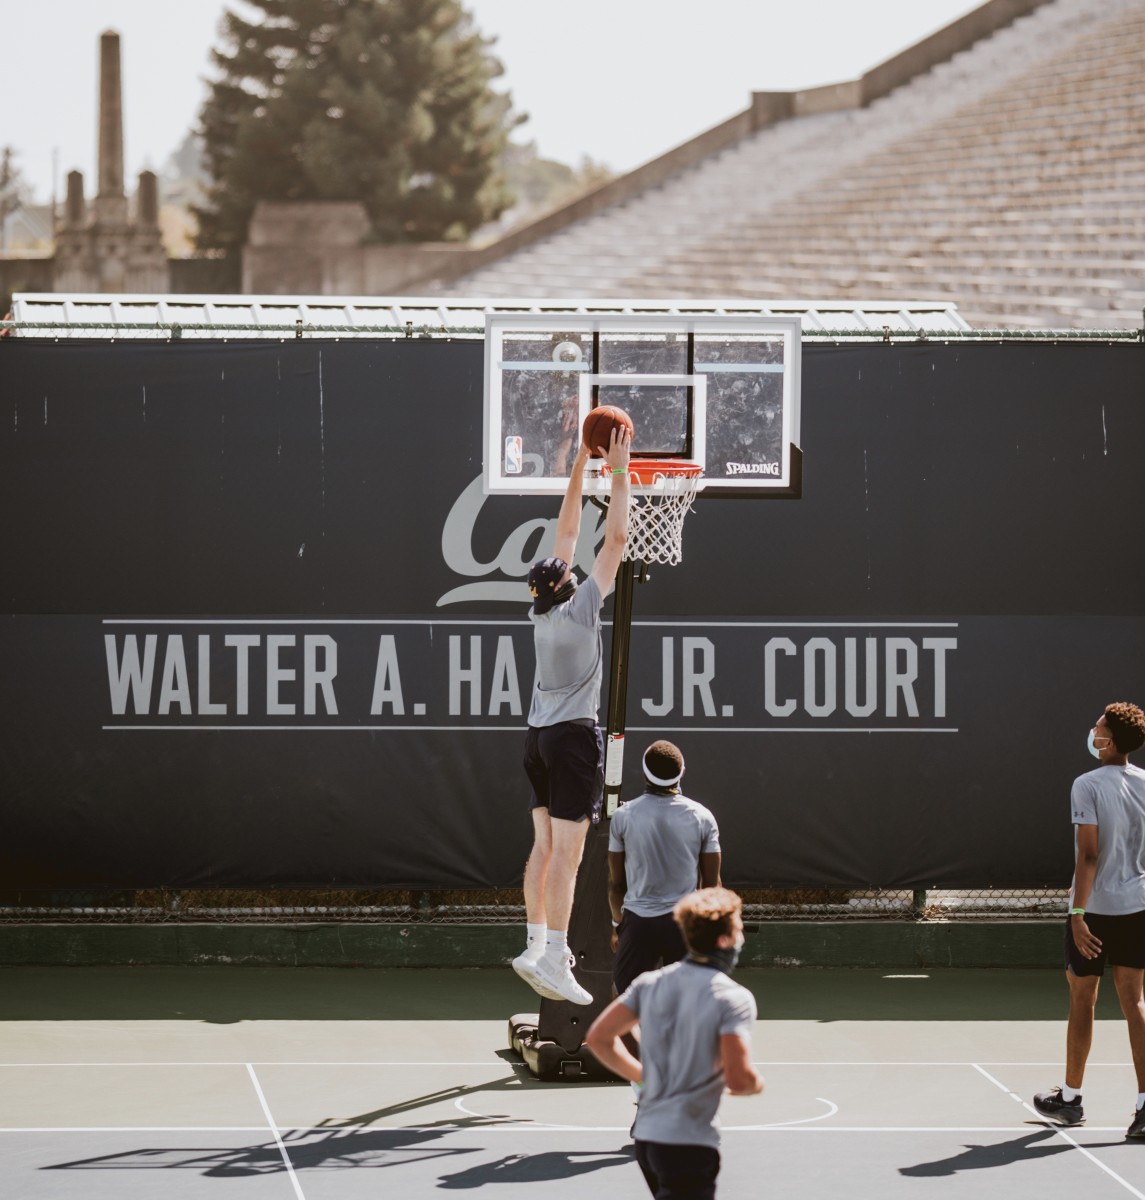 Cal spent much of the offseason practicing outdoors on a tennis court